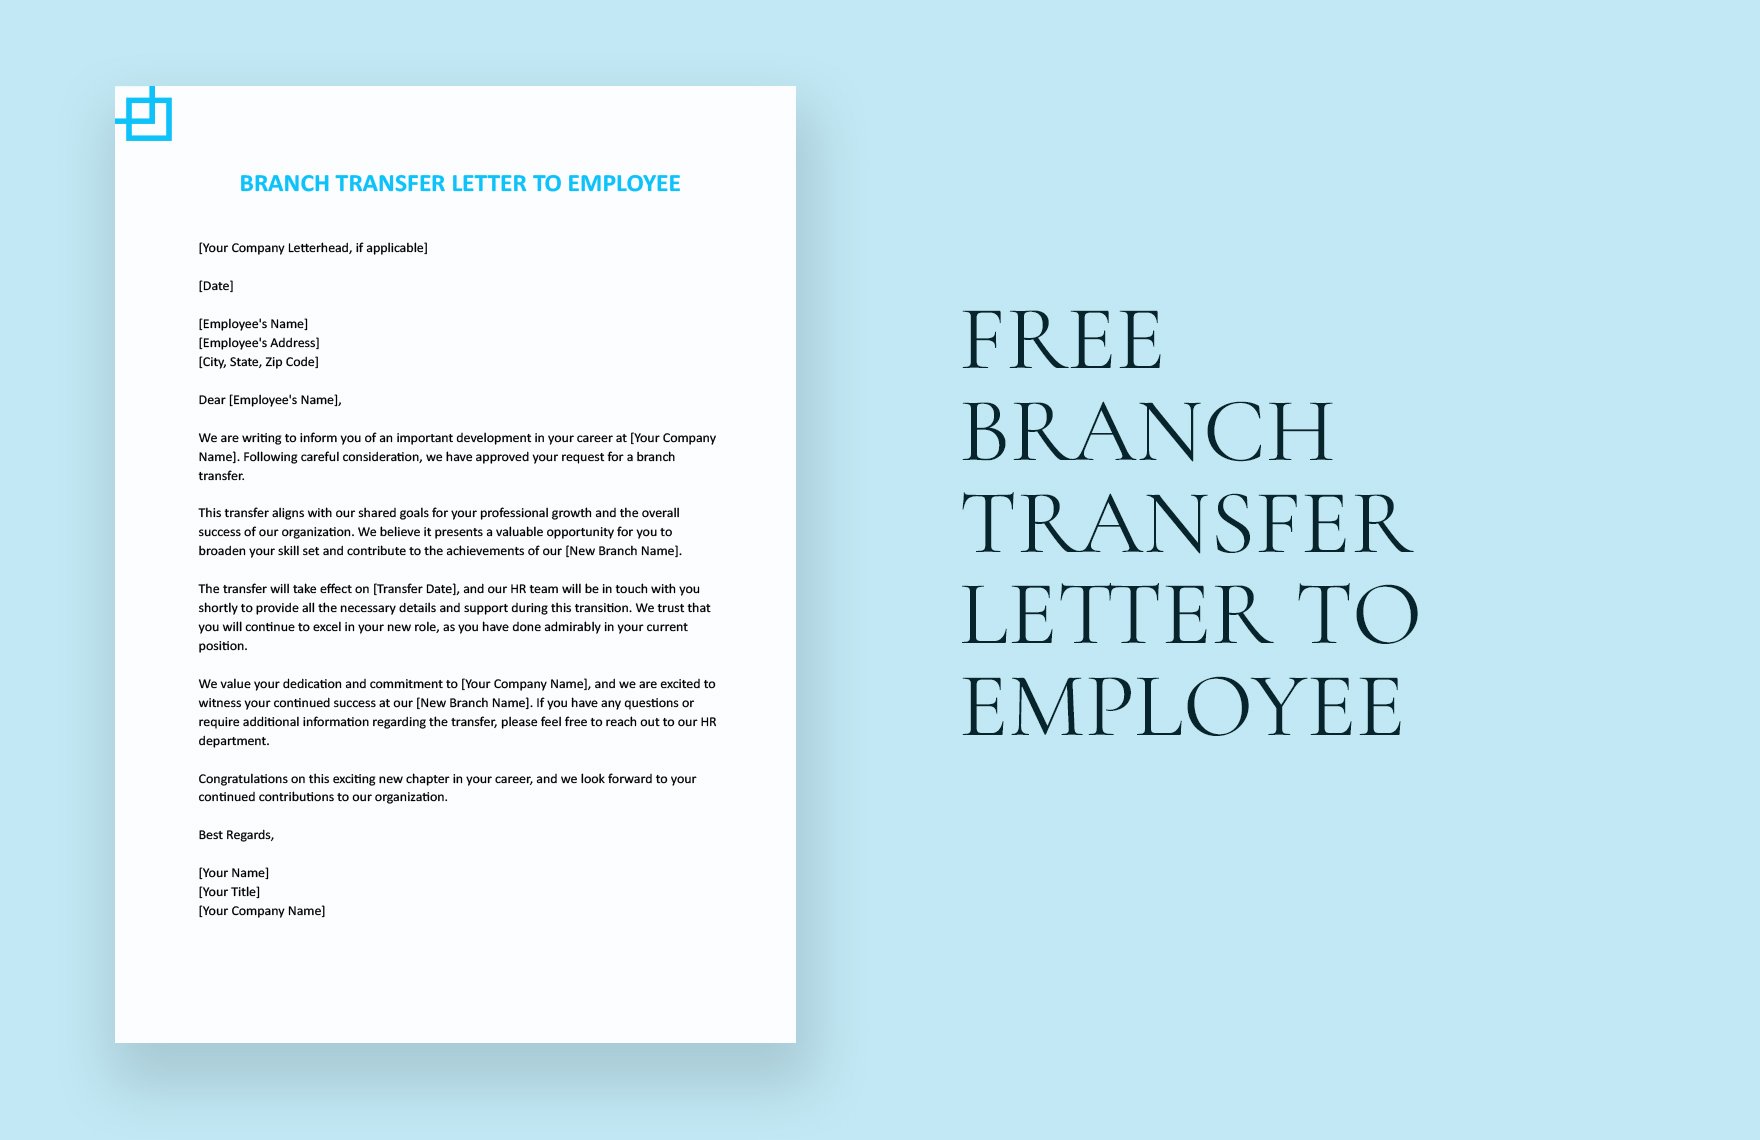 Branch Transfer Letter To Employee